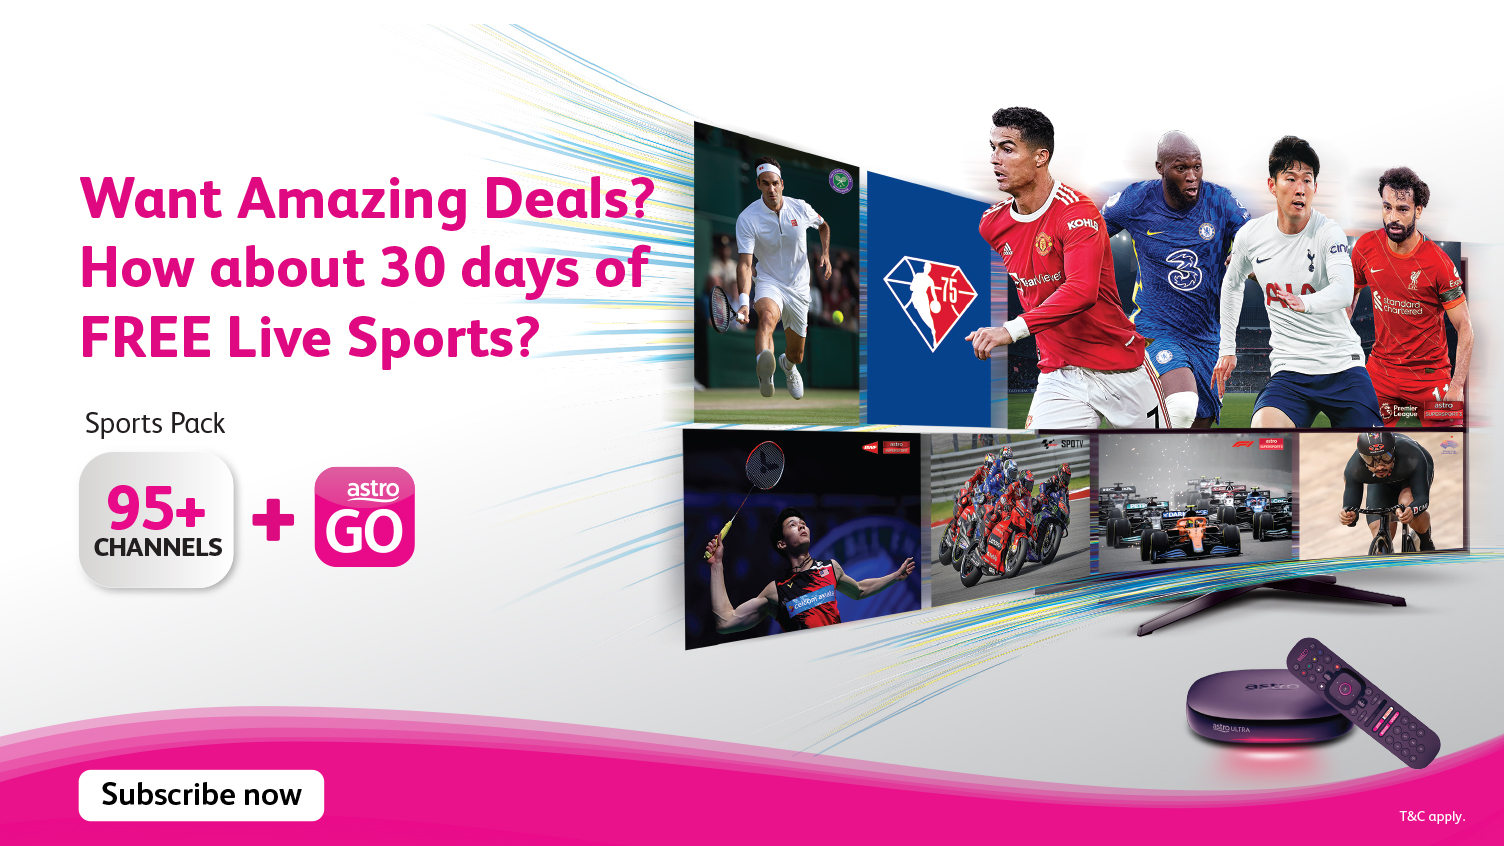 Astro Tv Live Stream Want 30 days of FREE Astro sports package? Here's how you can get it